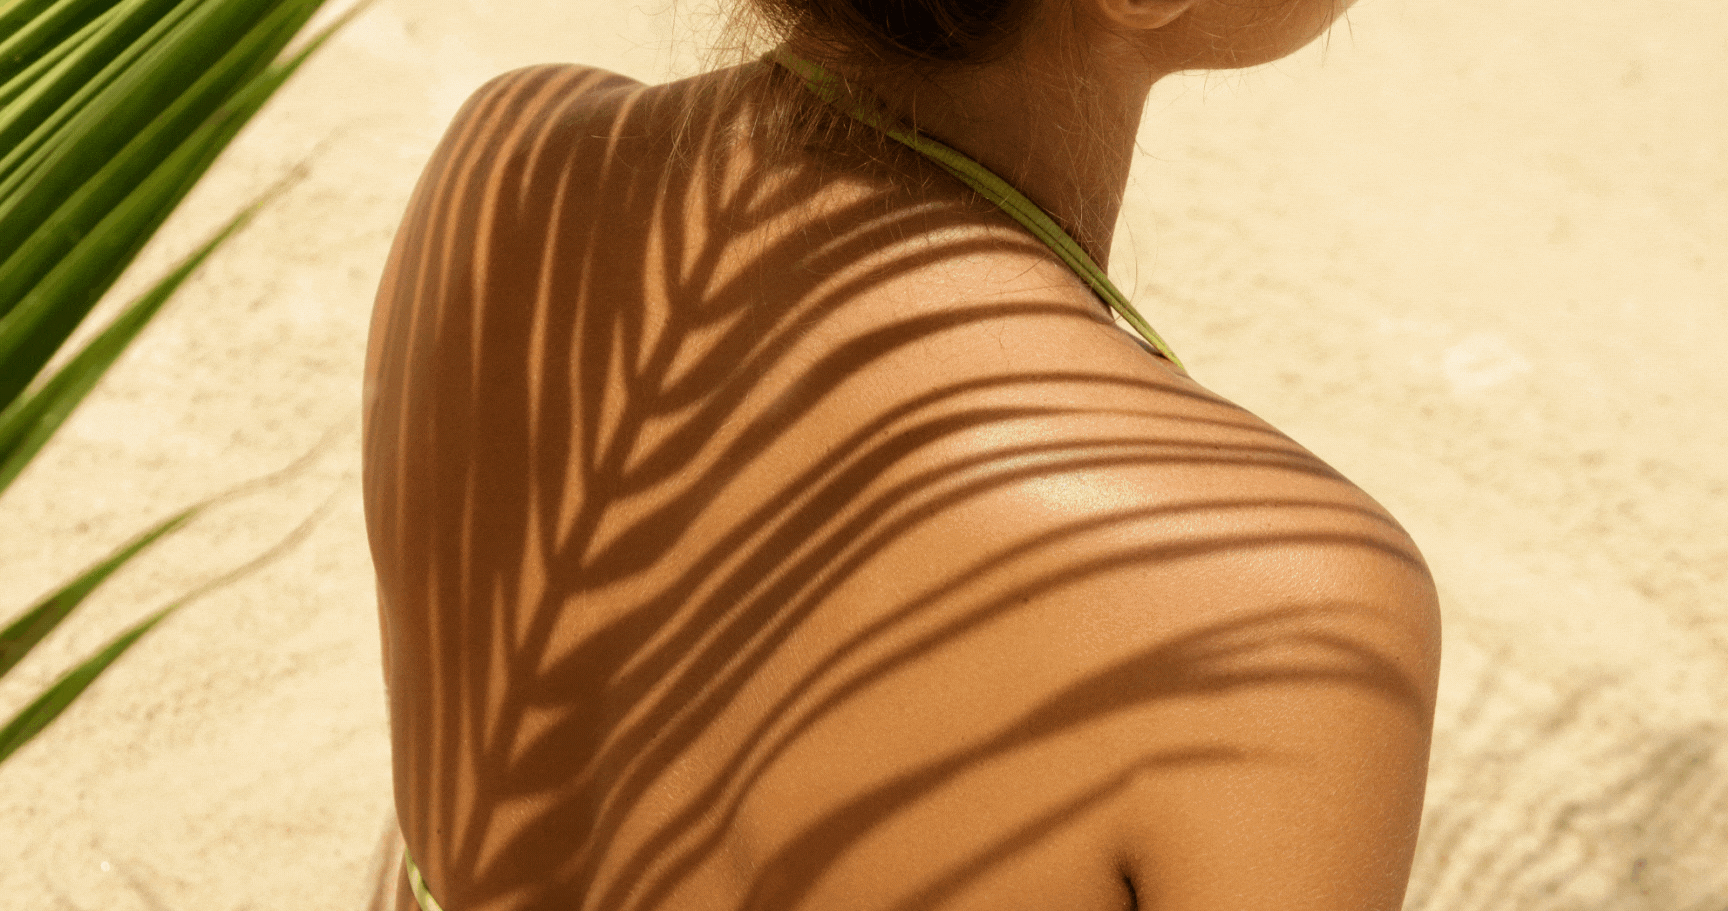 How to Soothe Sunburns with CBD Body Oil